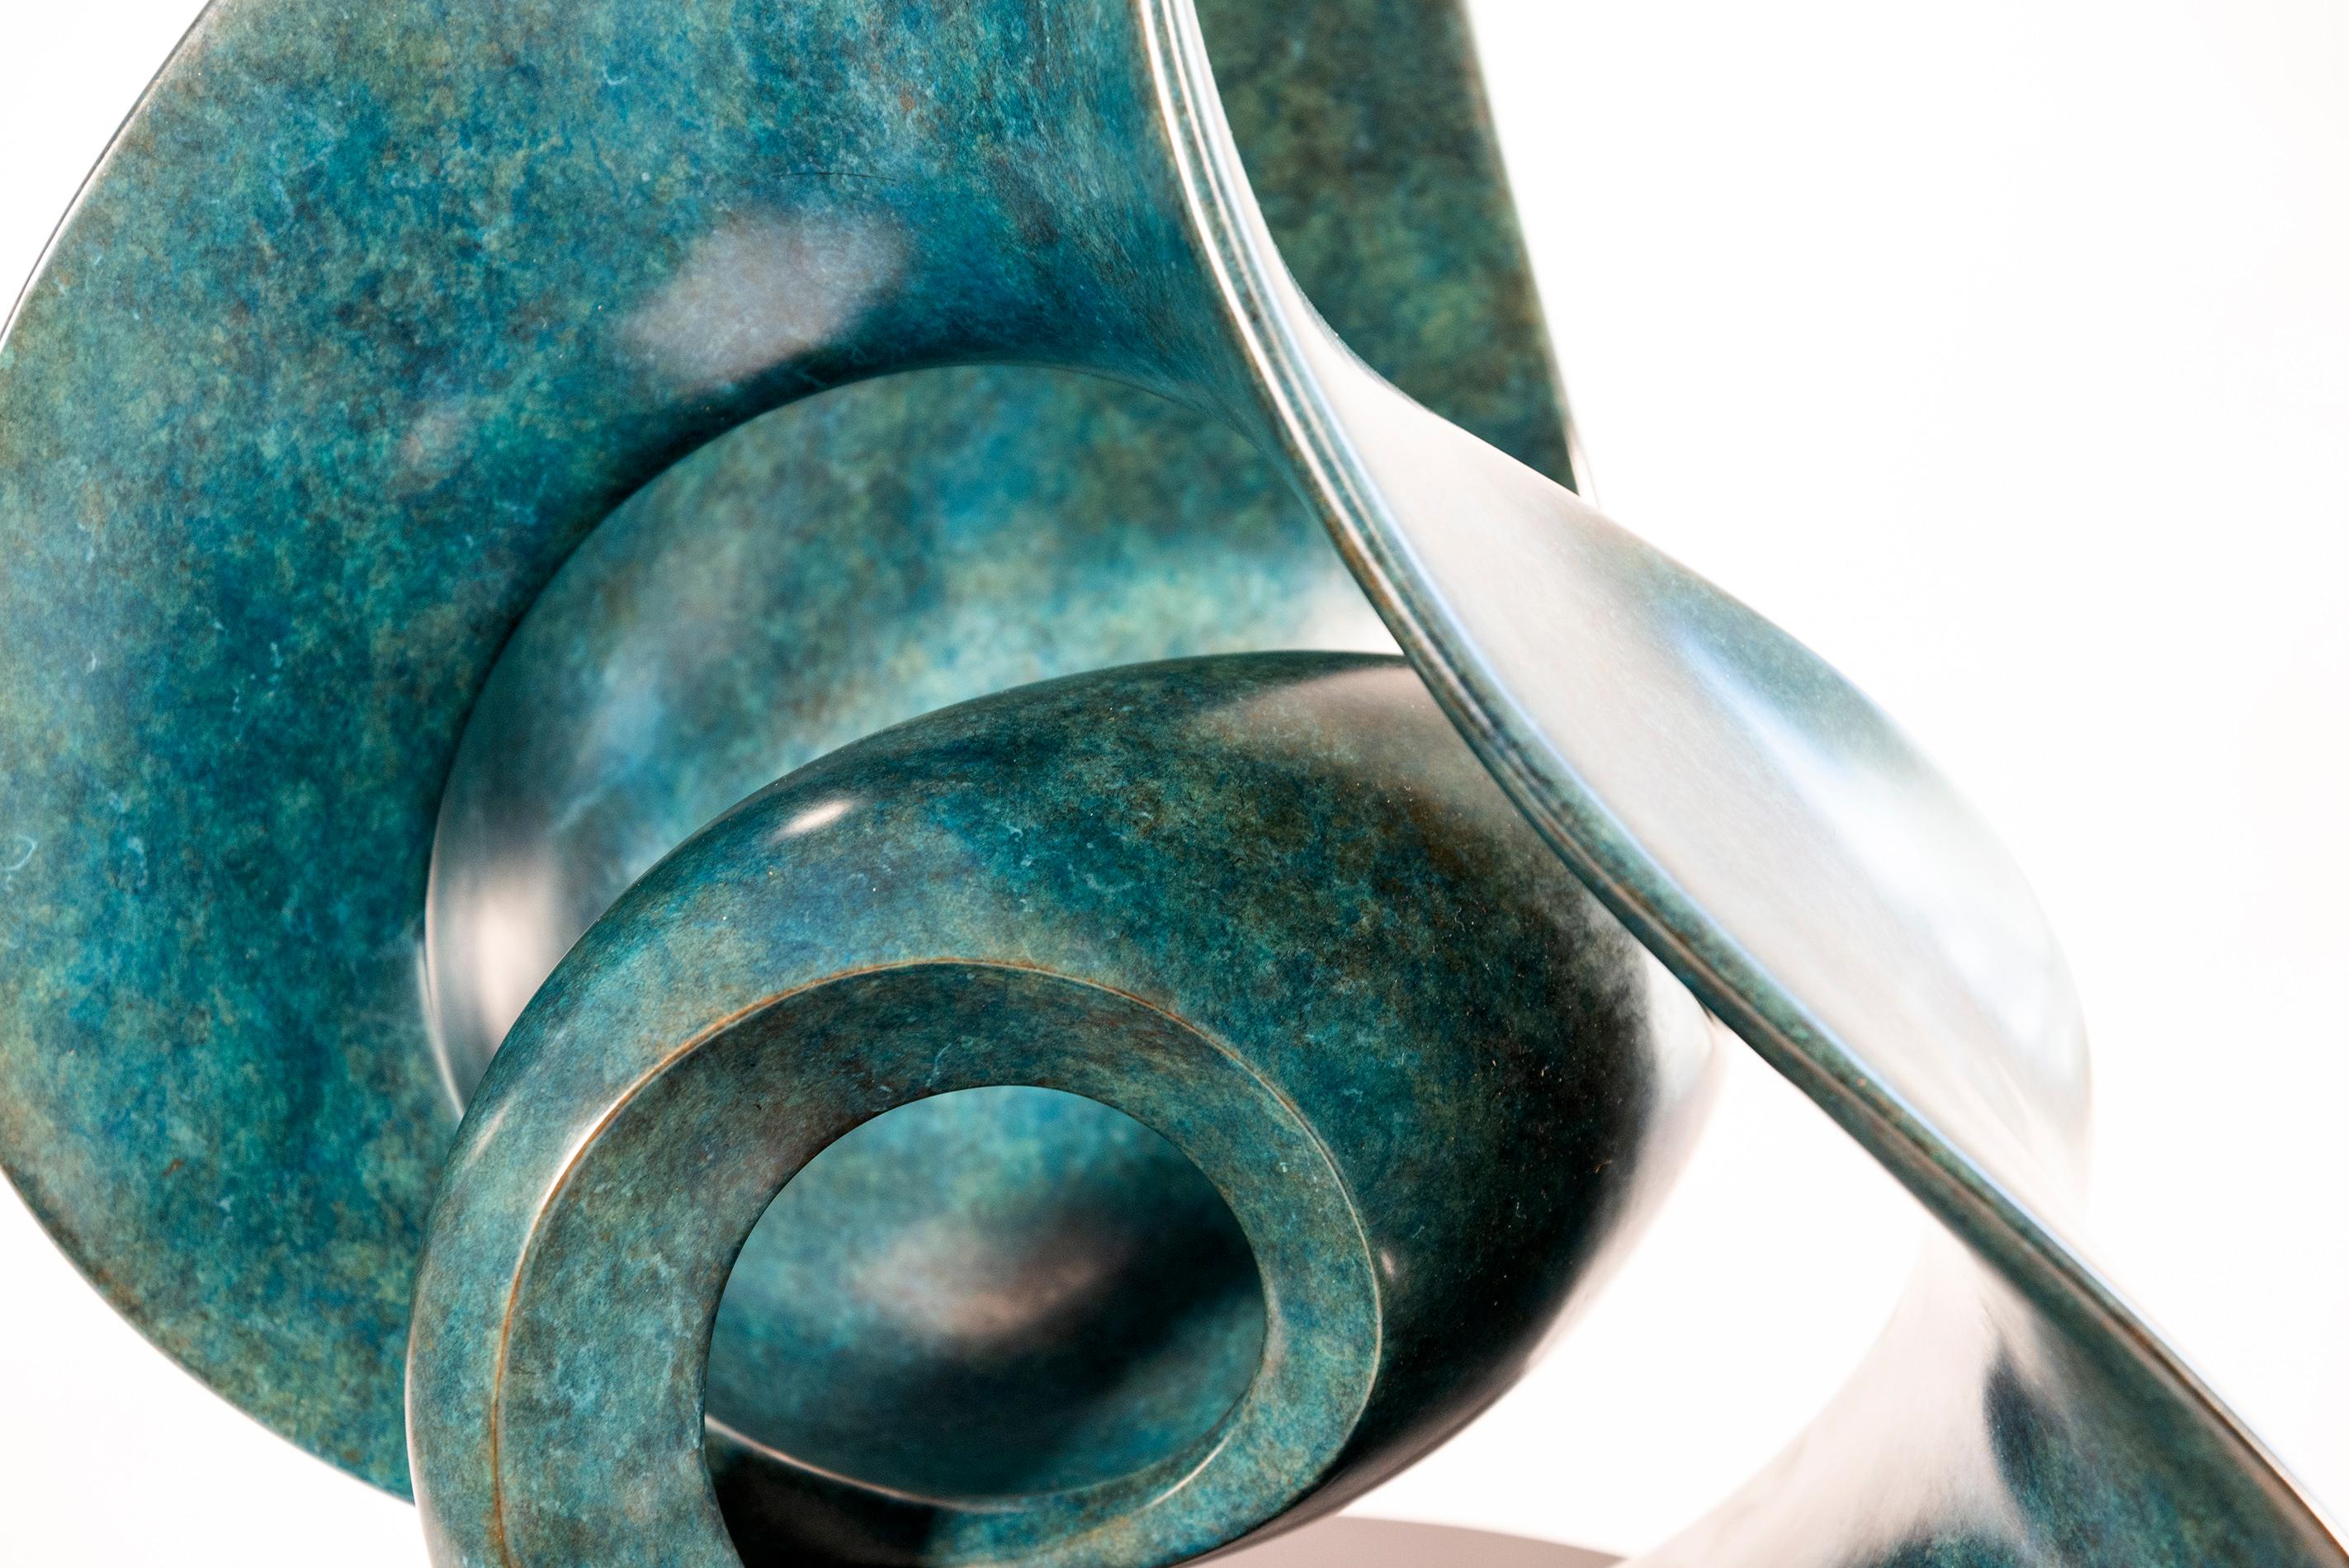 Eroica A.P. 1 - smooth, polished, abstract, contemporary, bronze sculpture For Sale 8